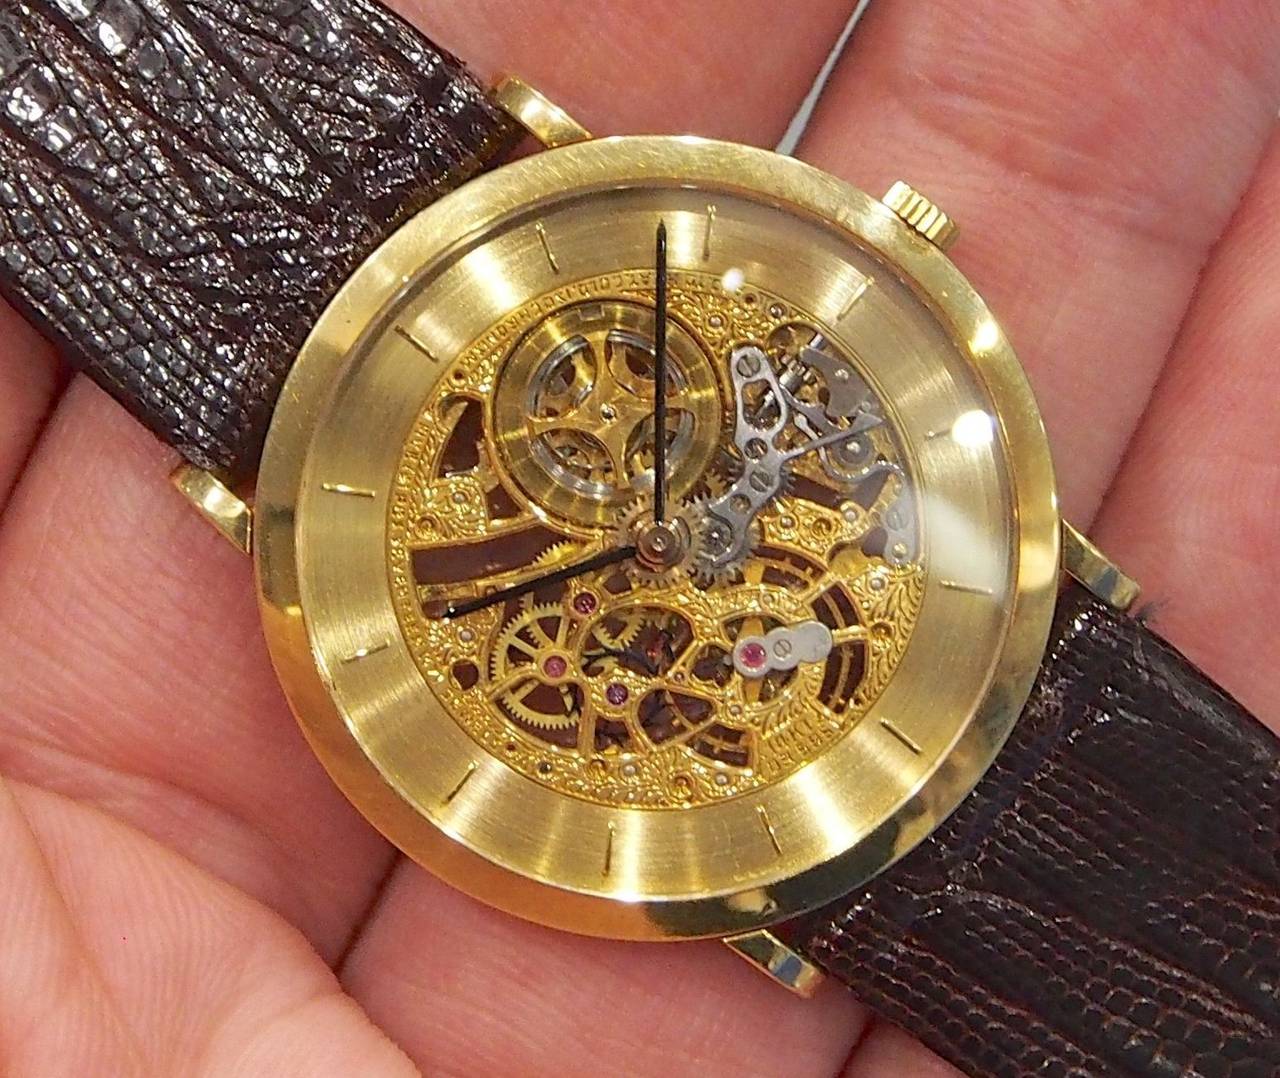 Brand Name  Audemars Piguet  
Style Number  5214  
Series  Skeleton   
Gender  Gent's   
Case Material  18K Yellow Gold  
Dial Color  Skeleton w/ Gold Chapter Ring  
Movement  Mechanical Wind  
Engine  Cal. 2003  
Functions  Hours, Minutes 